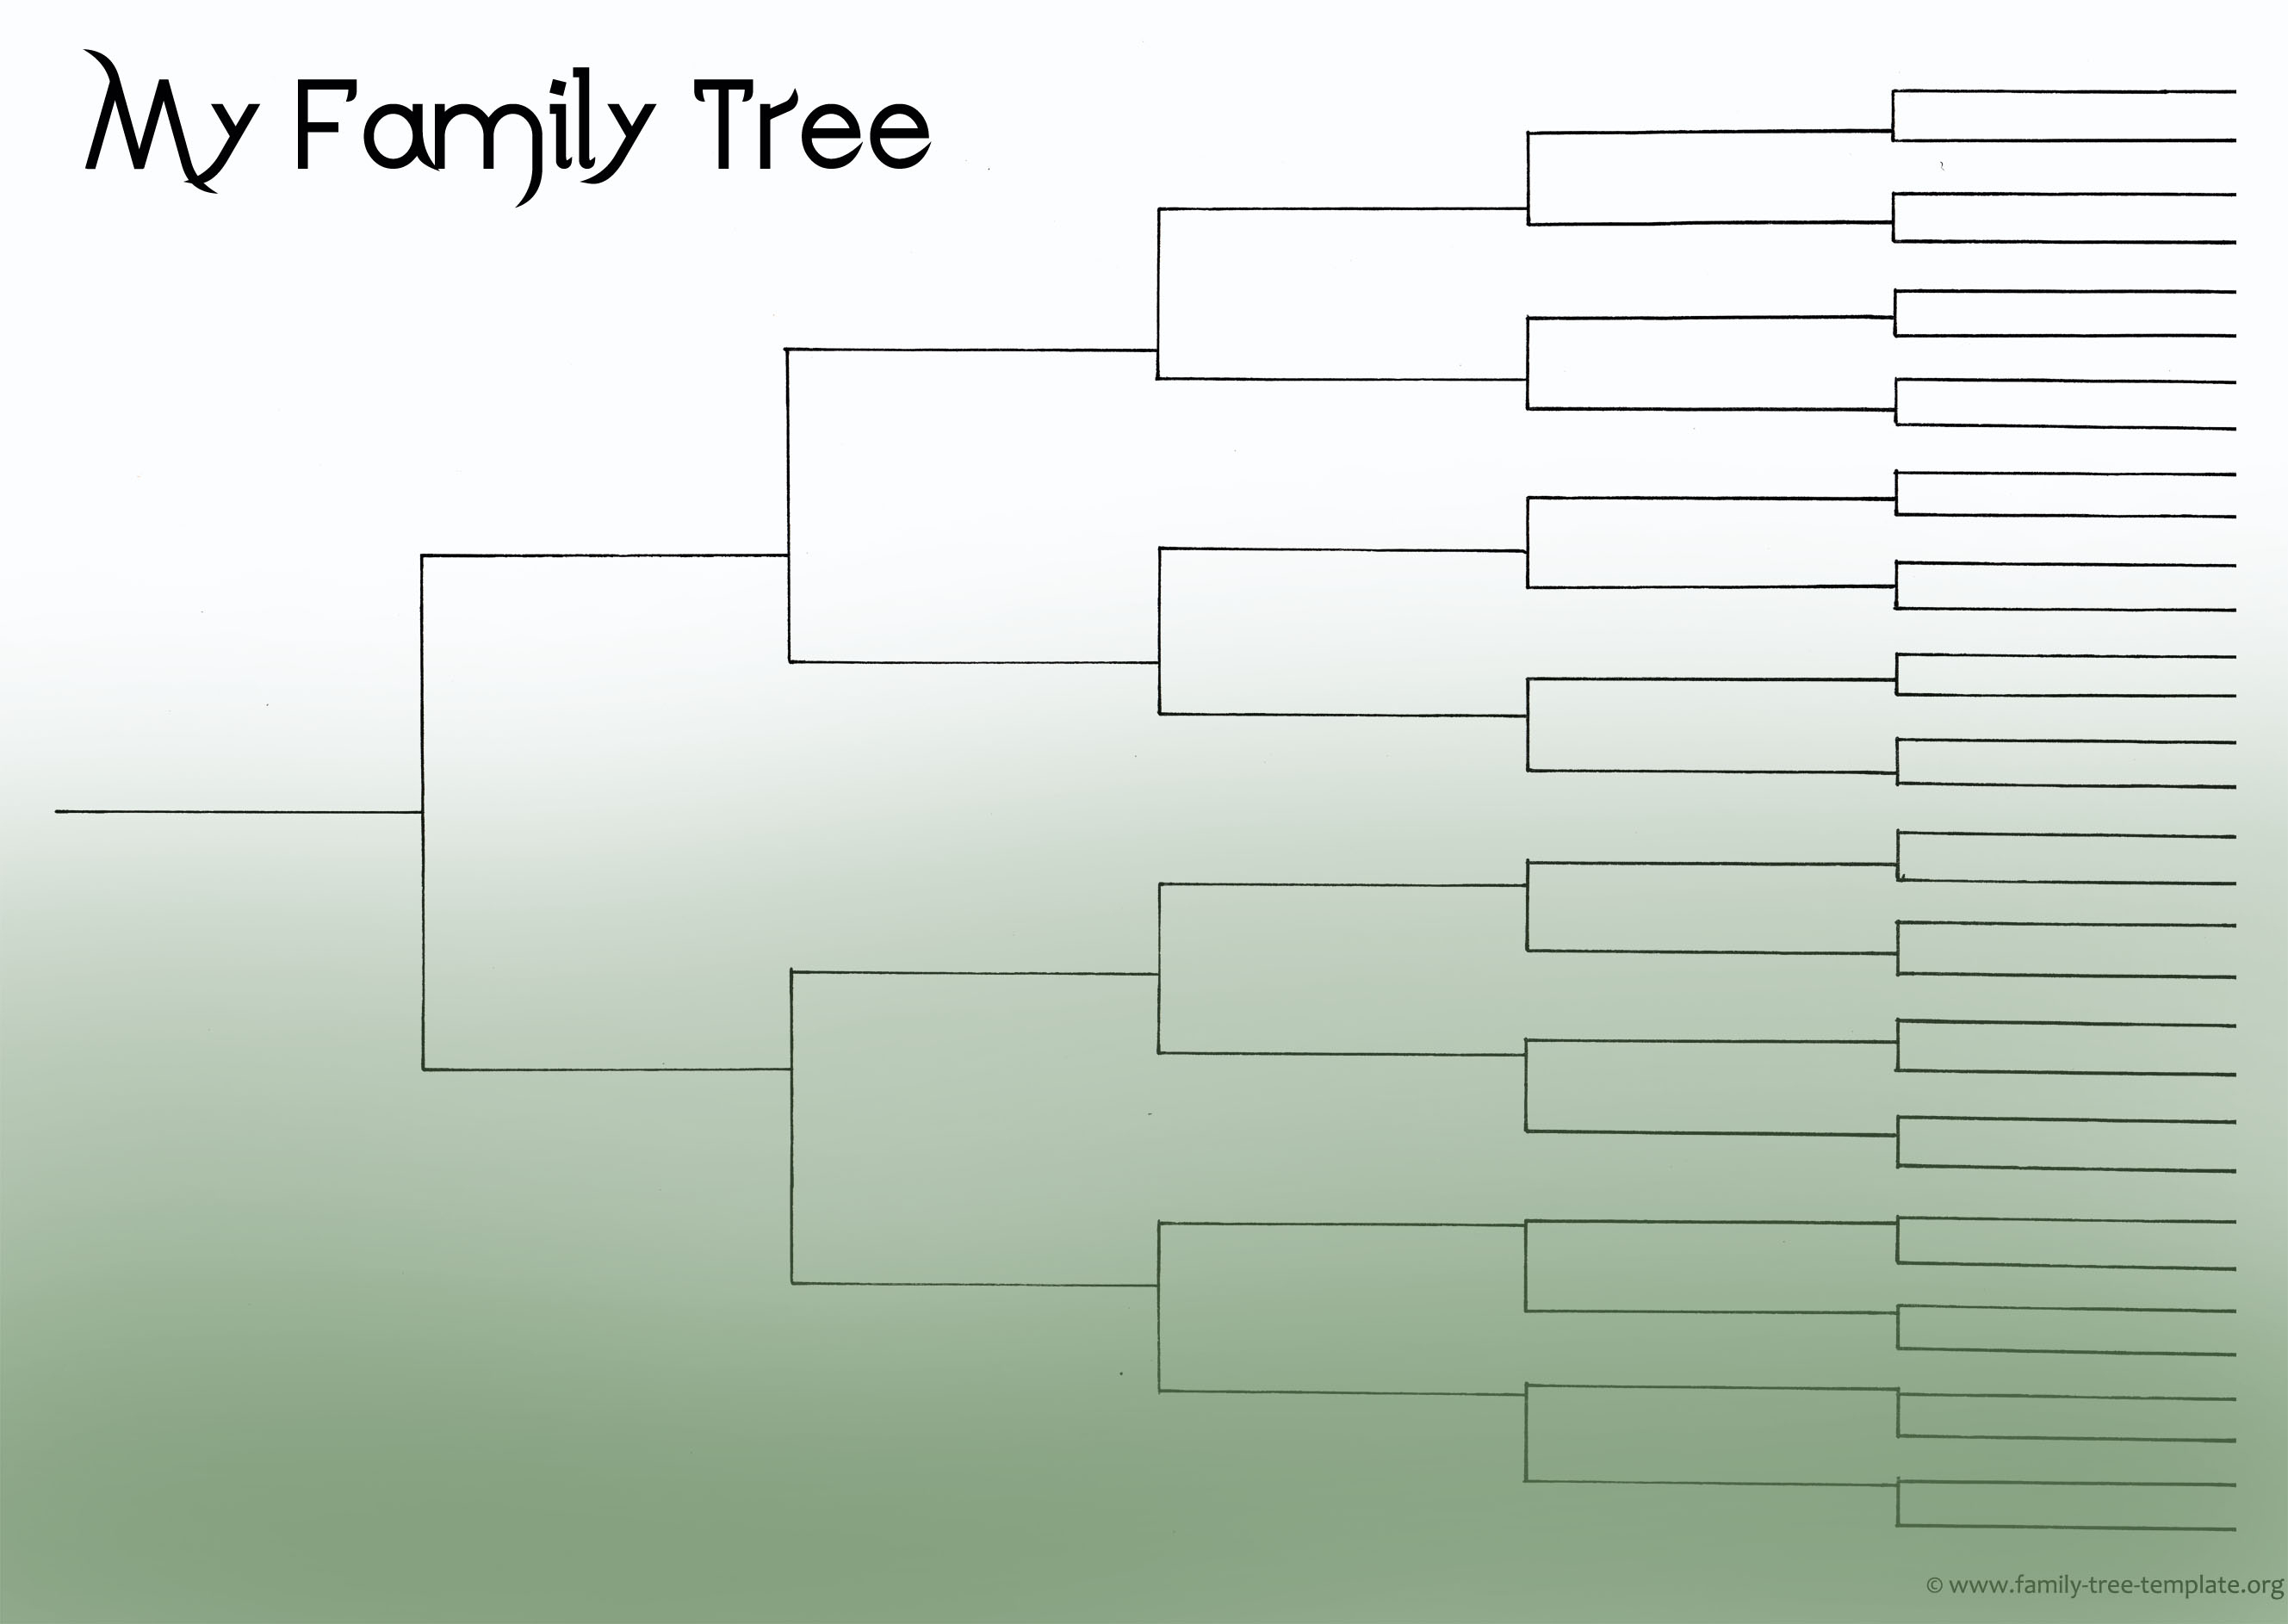 Family Tree Template Resources - Free Printable Family Tree Charts